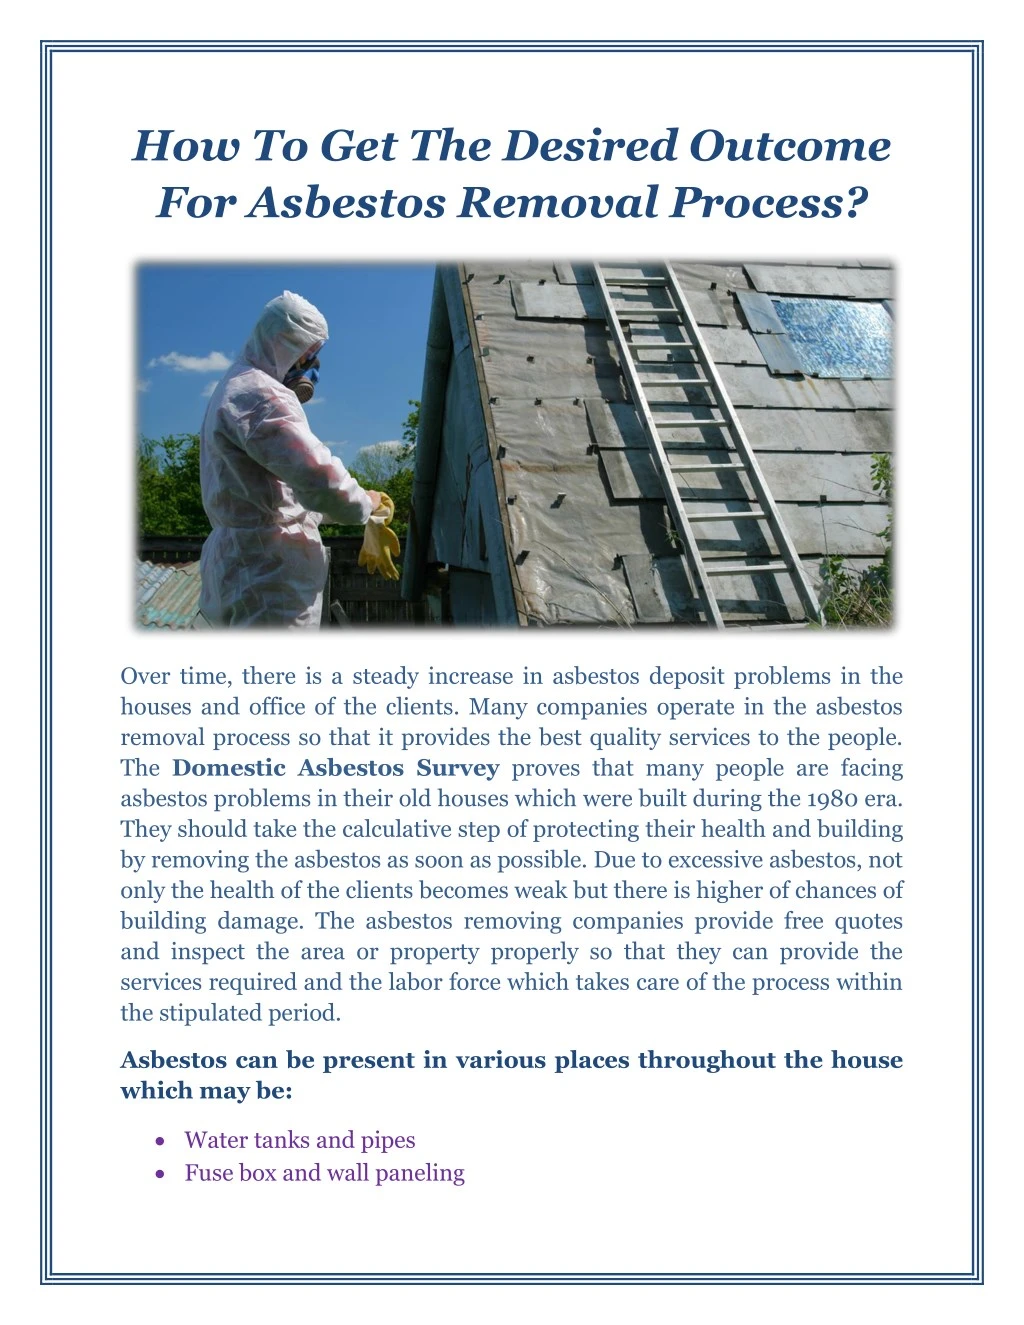 how to get the desired outcome for asbestos